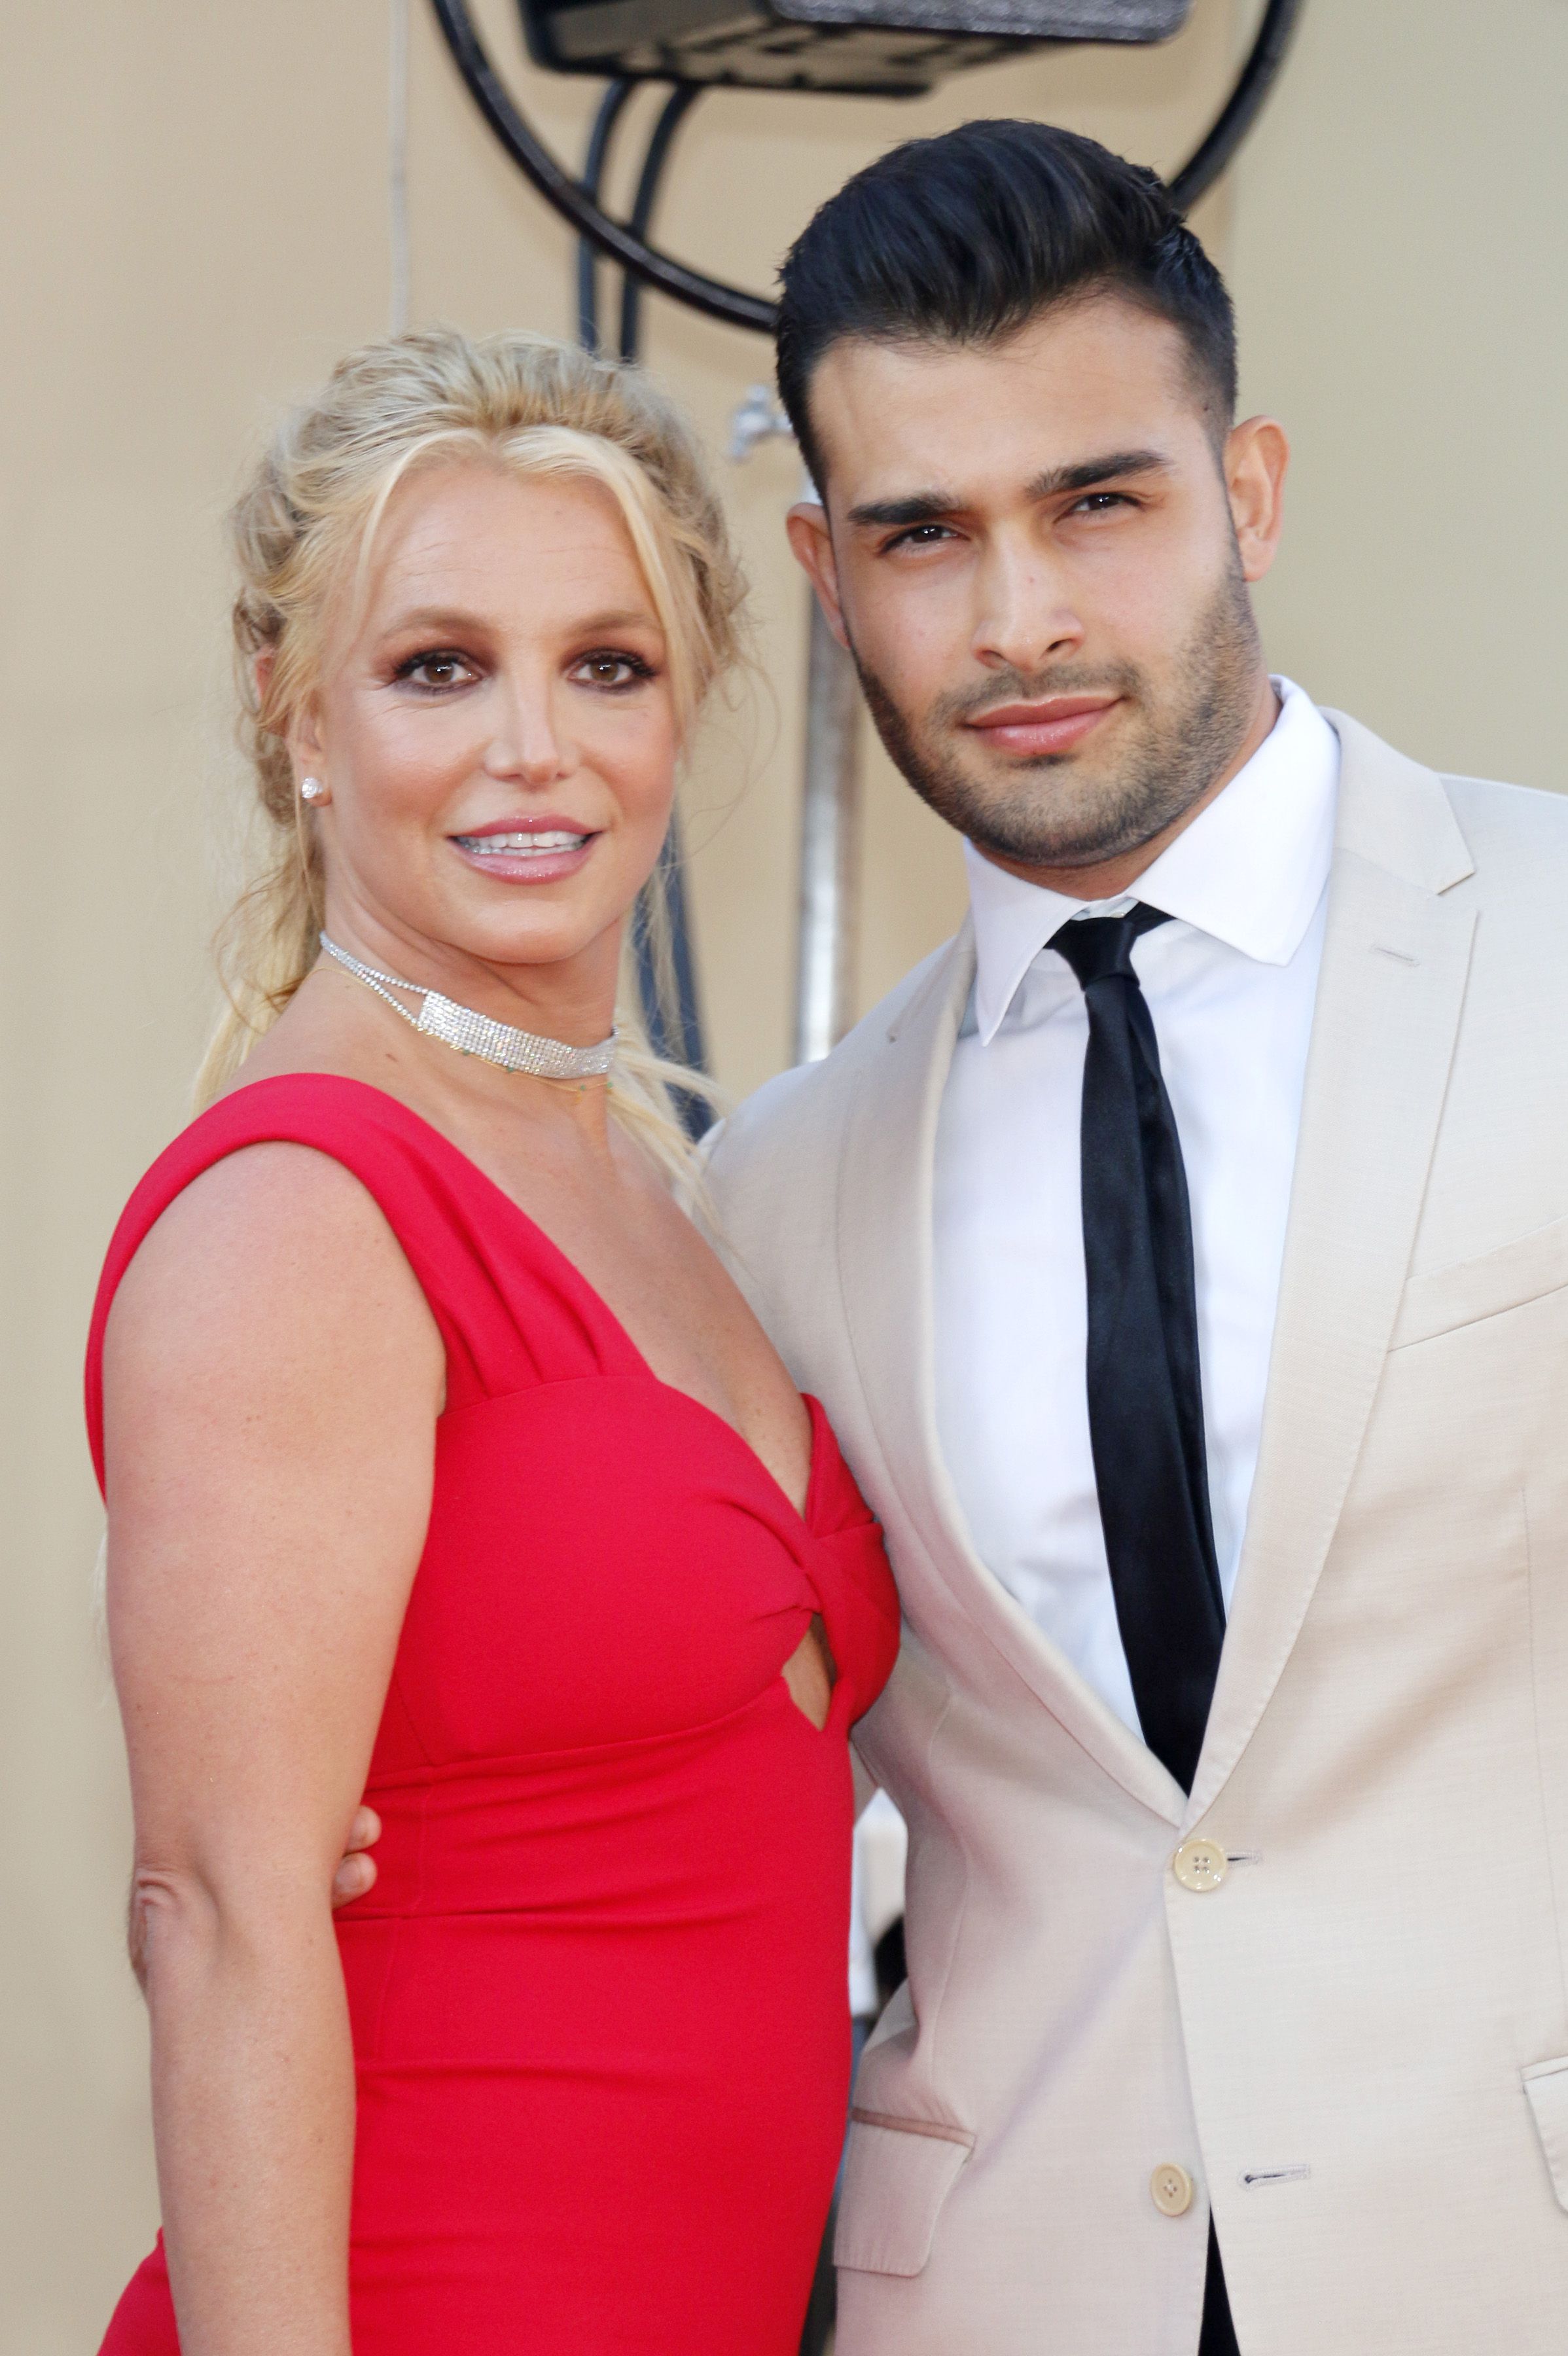 Britney Spears and Sam Asghari at an event